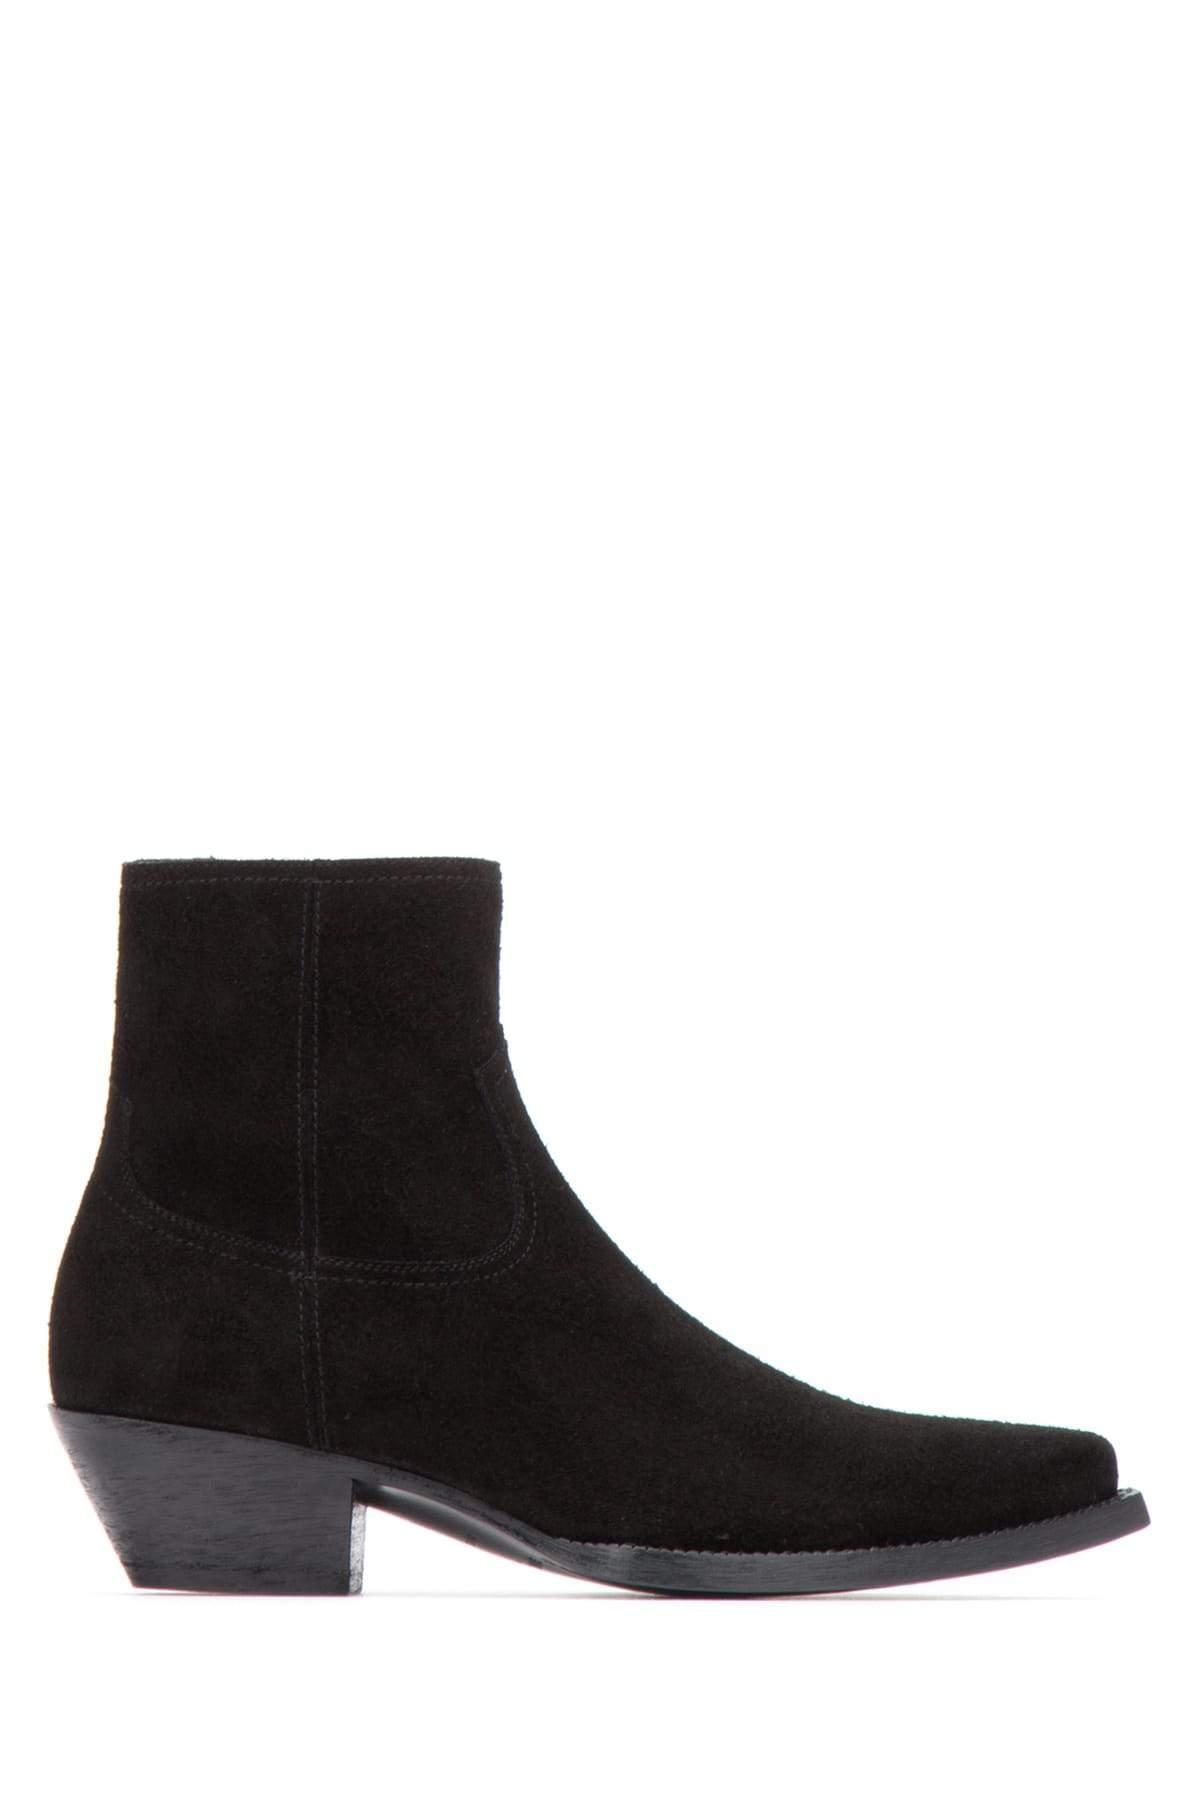 Saint Laurent Leather Lukas 40 Ankle Boots in Black for Men - Lyst